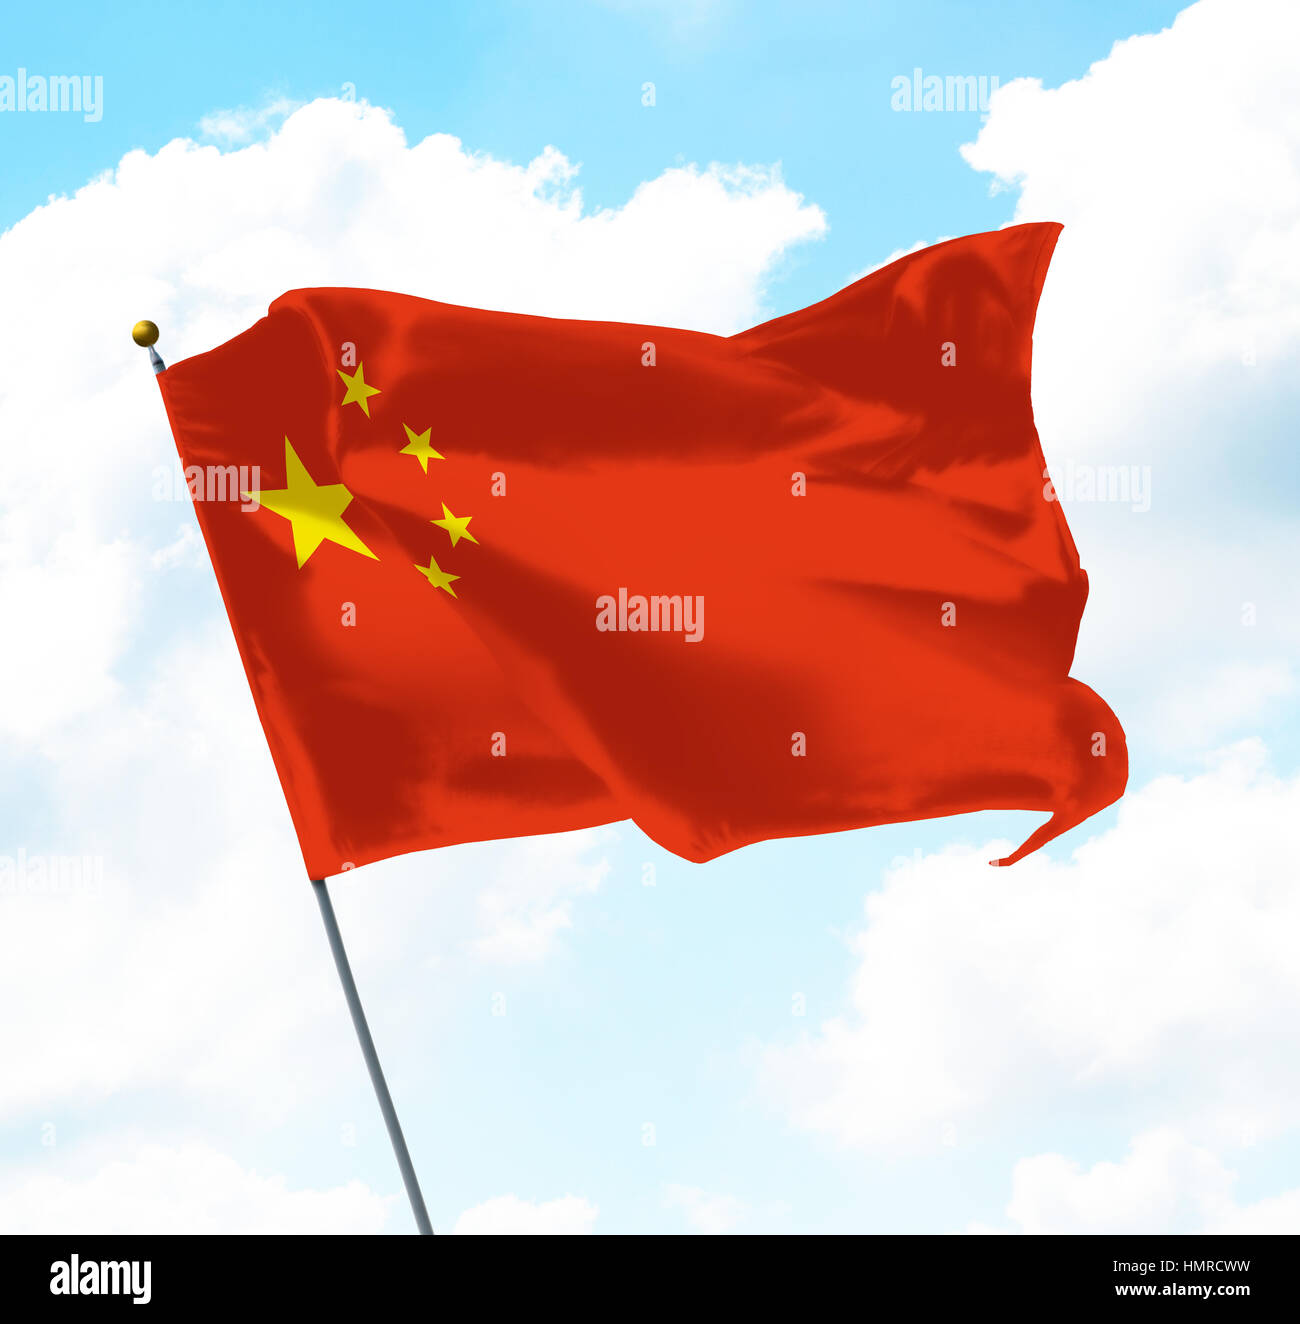 Flag of China Raised Up in The Sky Stock Photo